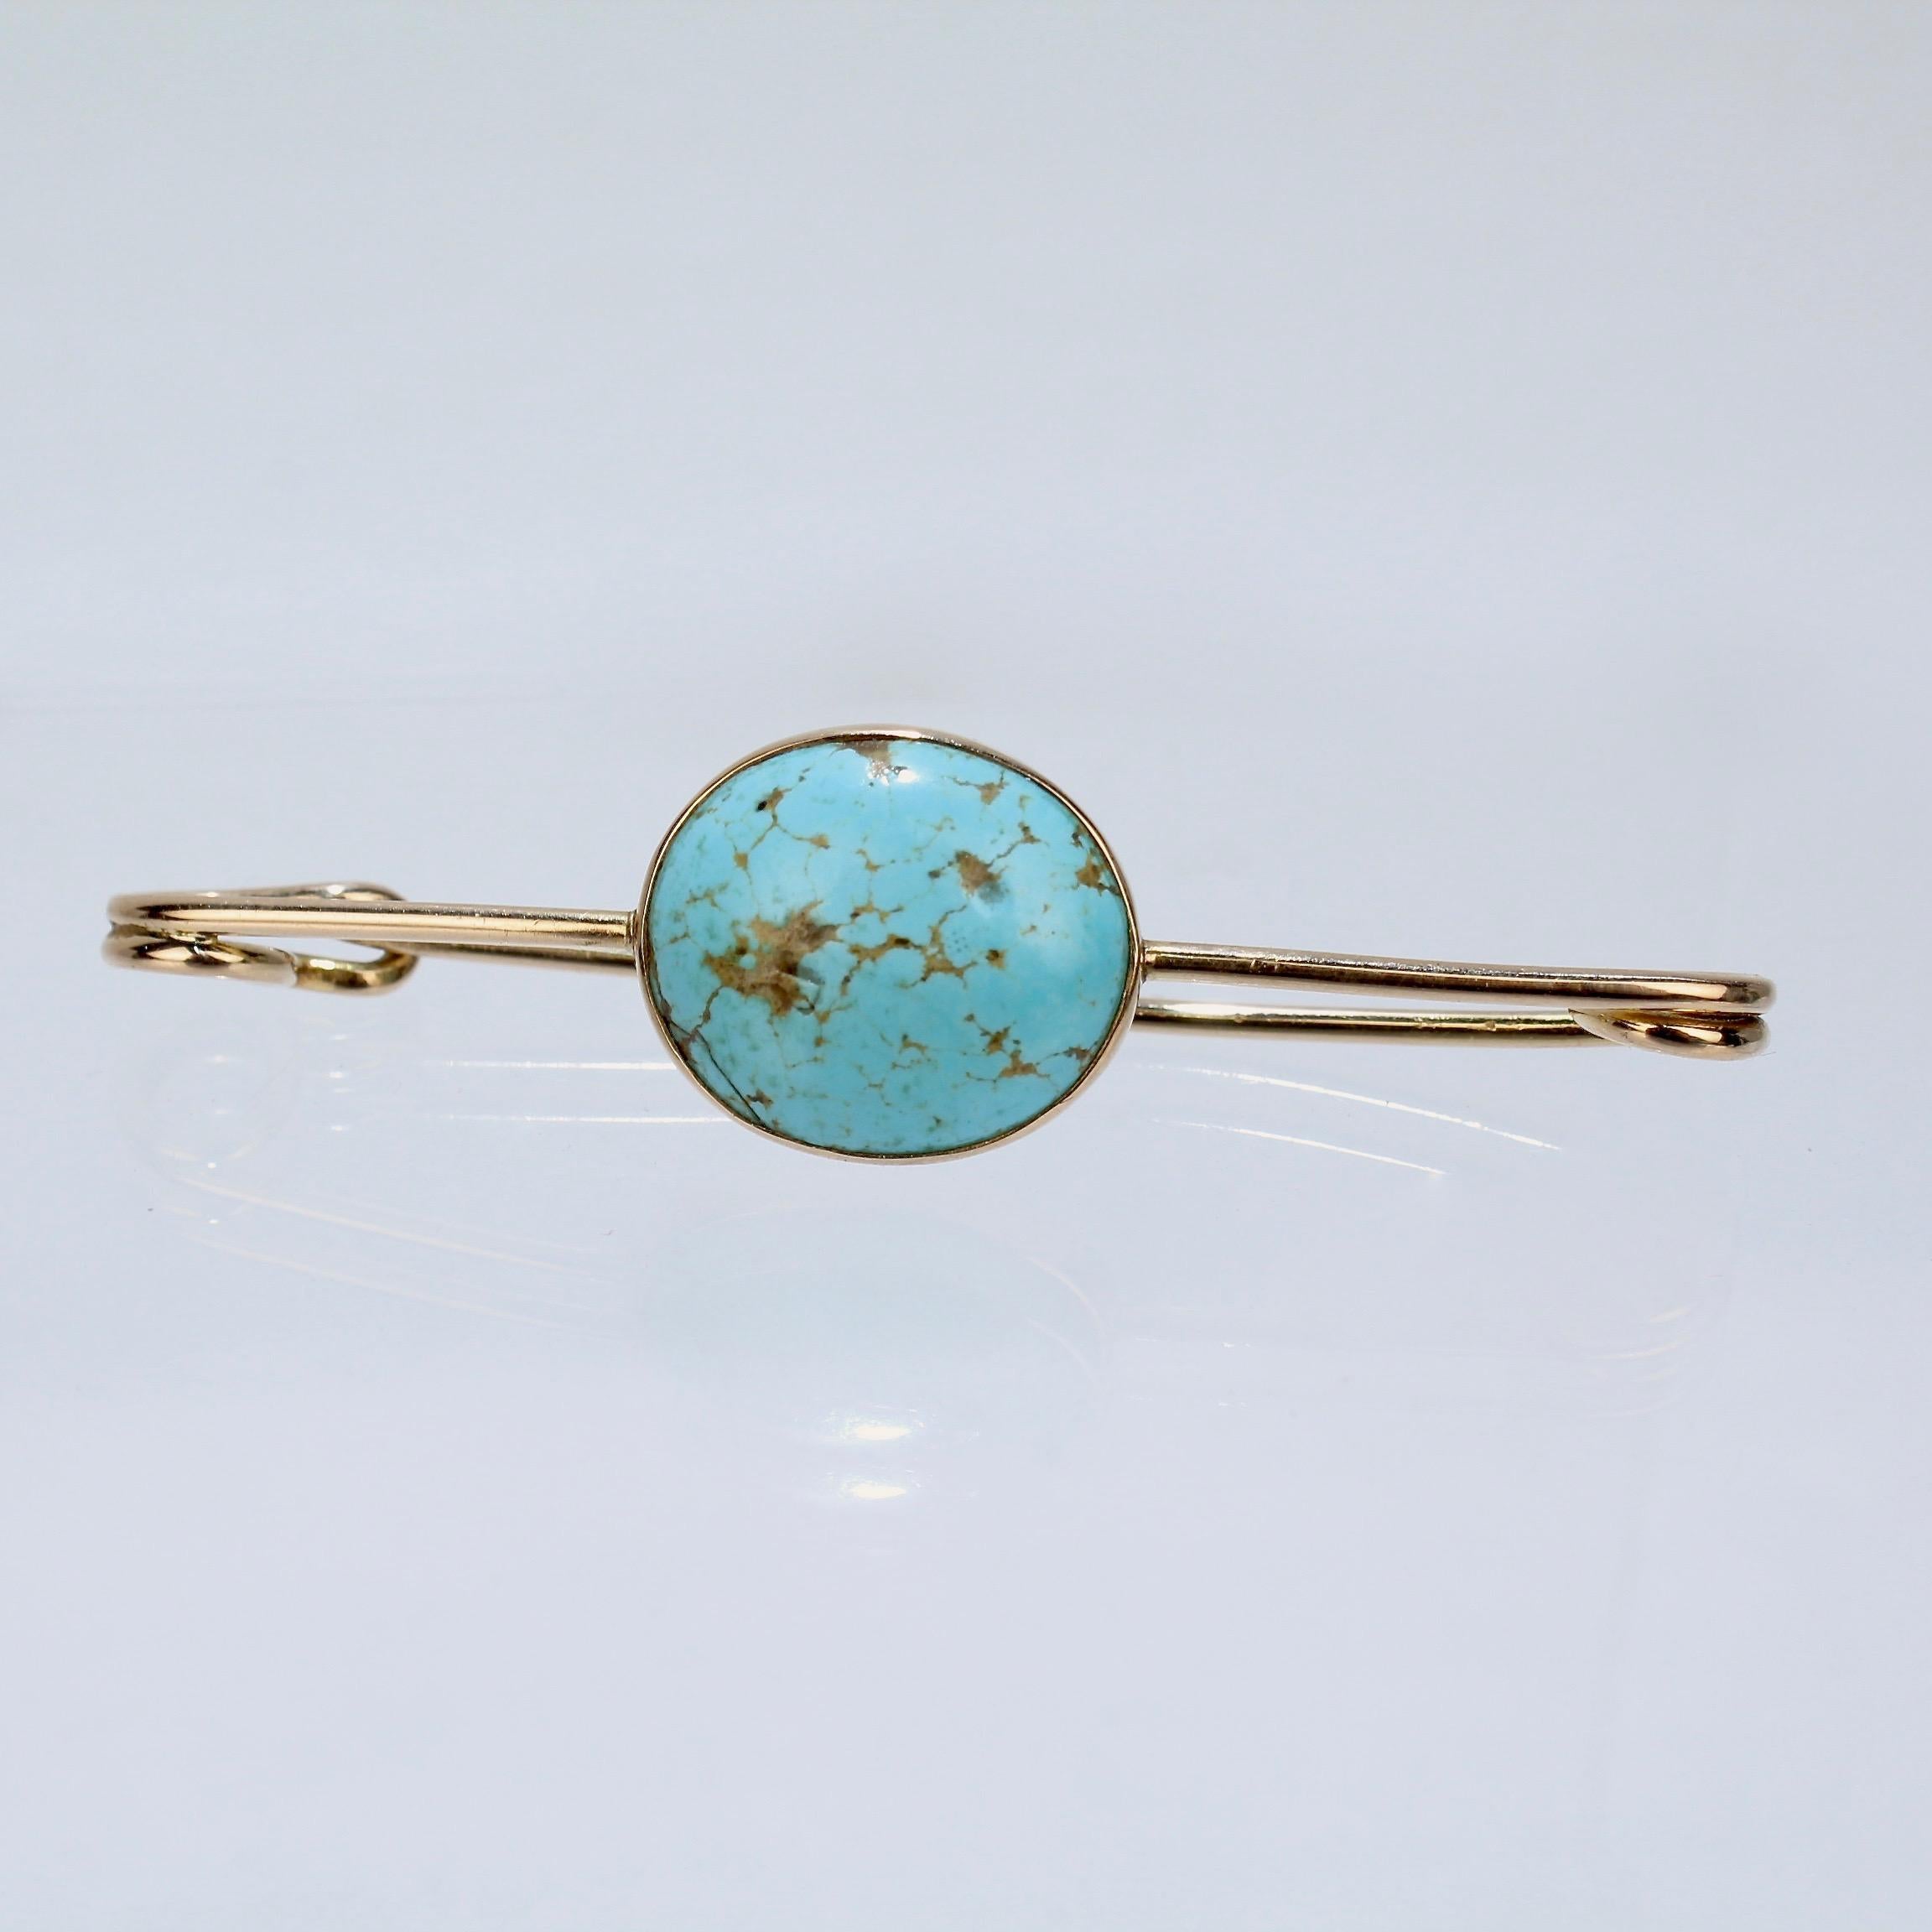 A very fine 14k gold and turquoise scarf pin or brooch.

Fashioned as a bar pin and bezel set with a beautiful turquoise matrix cabochon to the center.

The reverse having a coiled spring and straight pin that is secured in a safety-pin